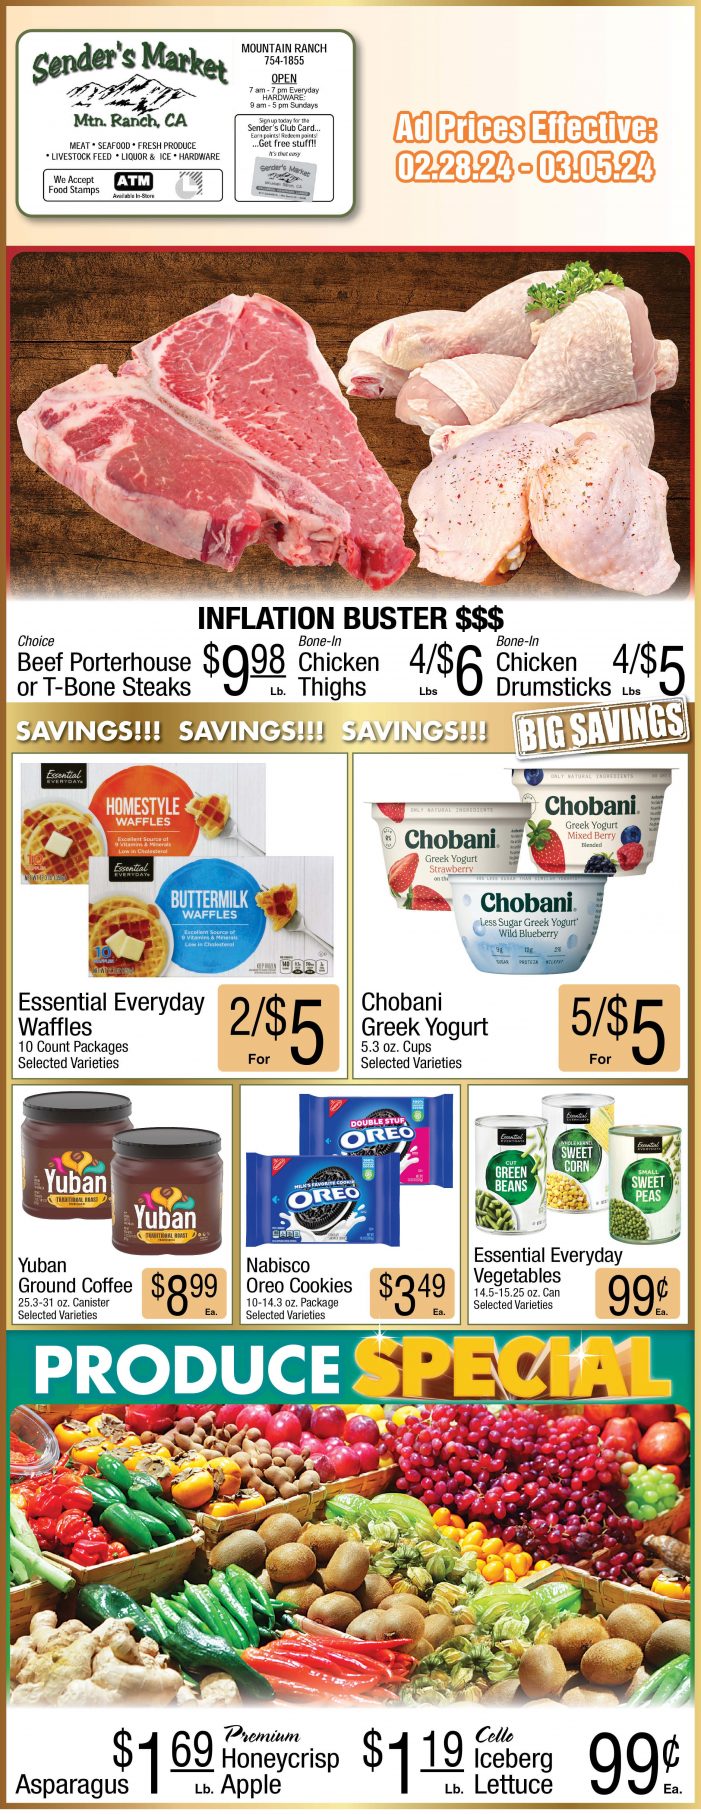 Sender’s Market Weekly Ad & Grocery Specials Through March 5th! Shop Local & Save!!